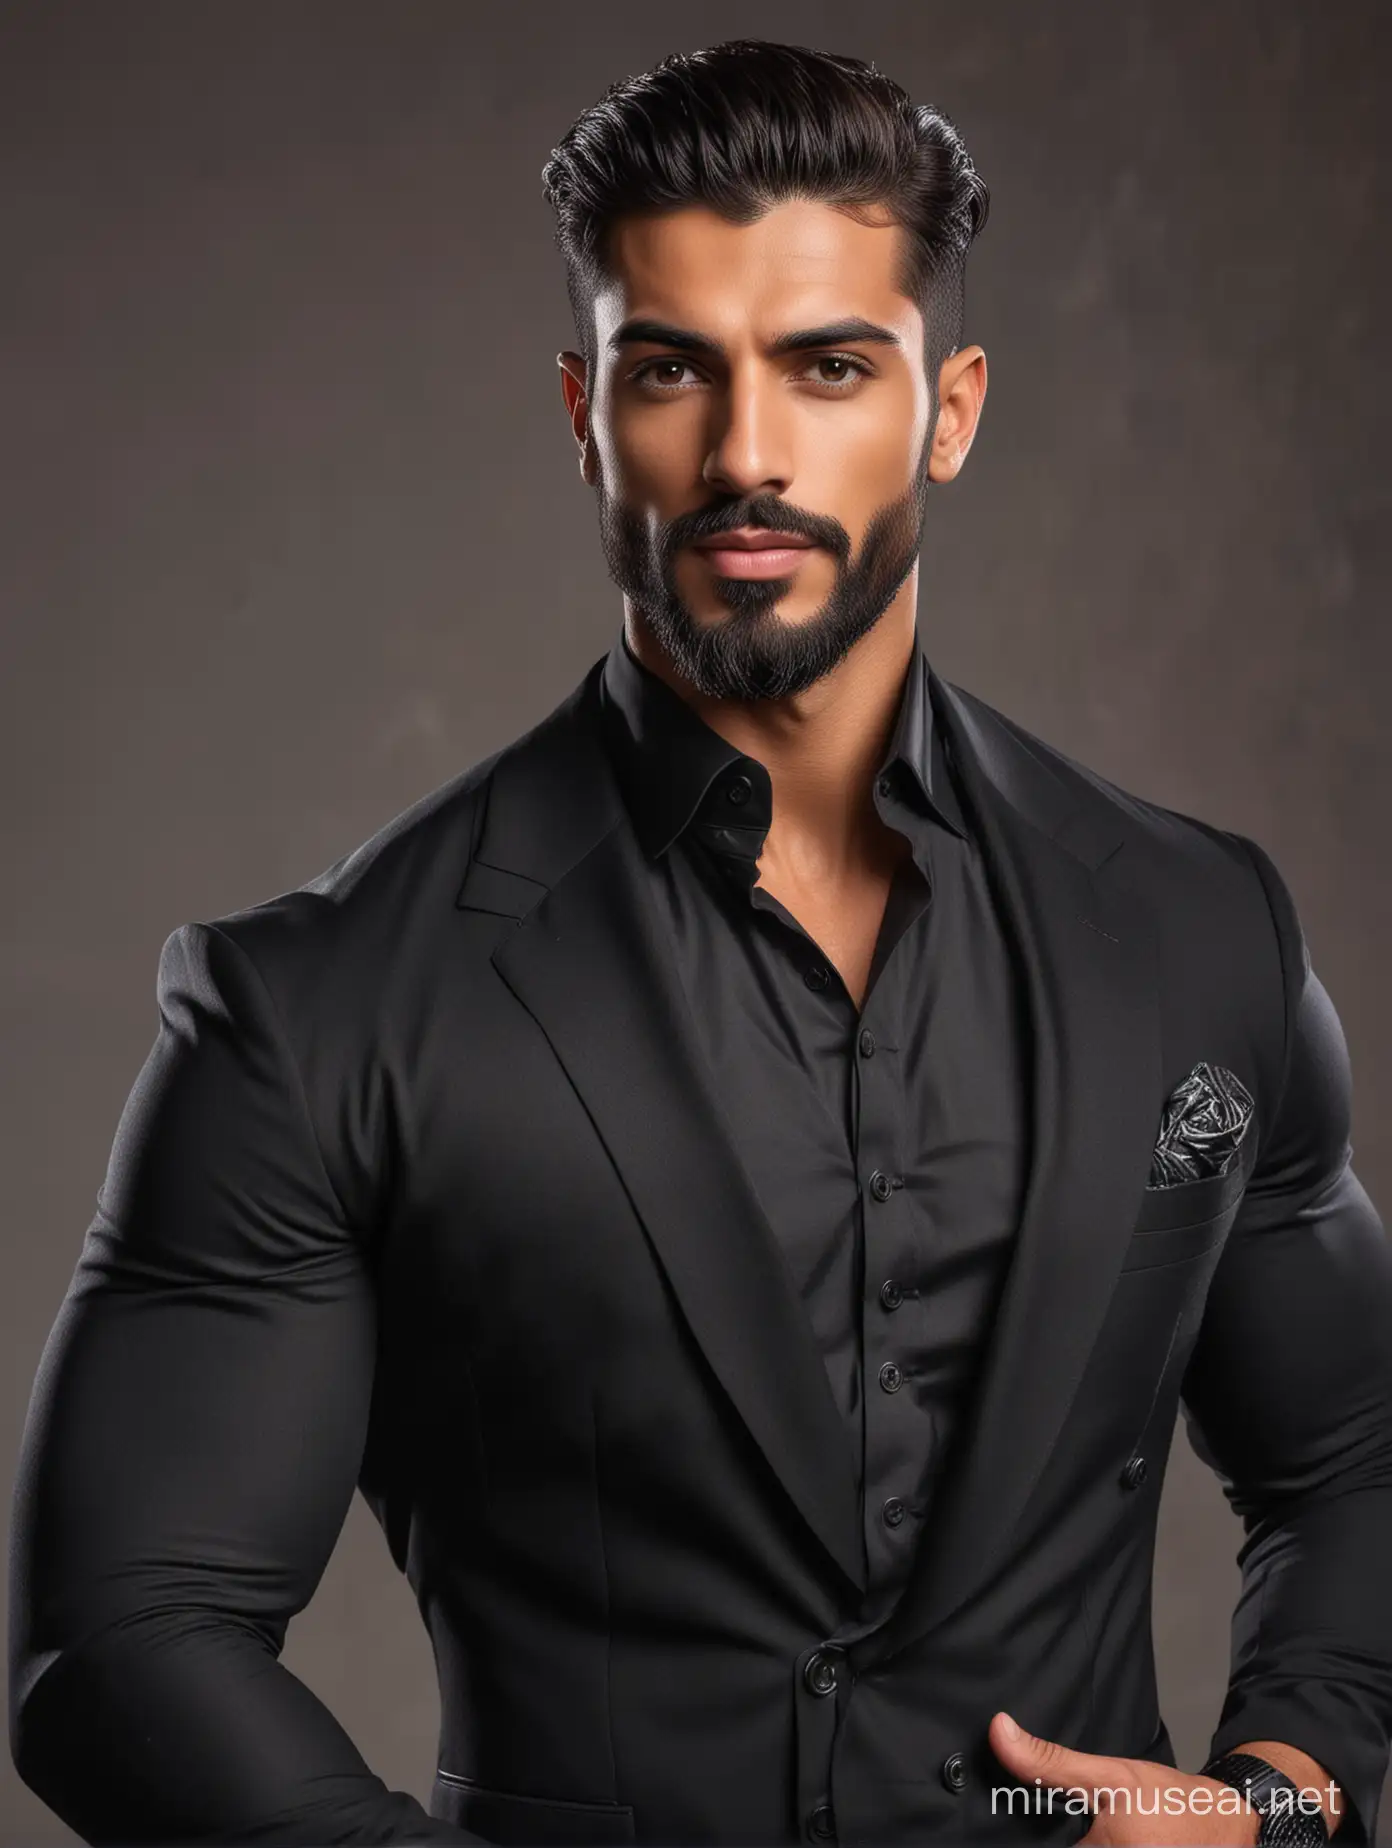 Handsome Arabian Bodybuilder in Stylish Black Suit with Striking Features